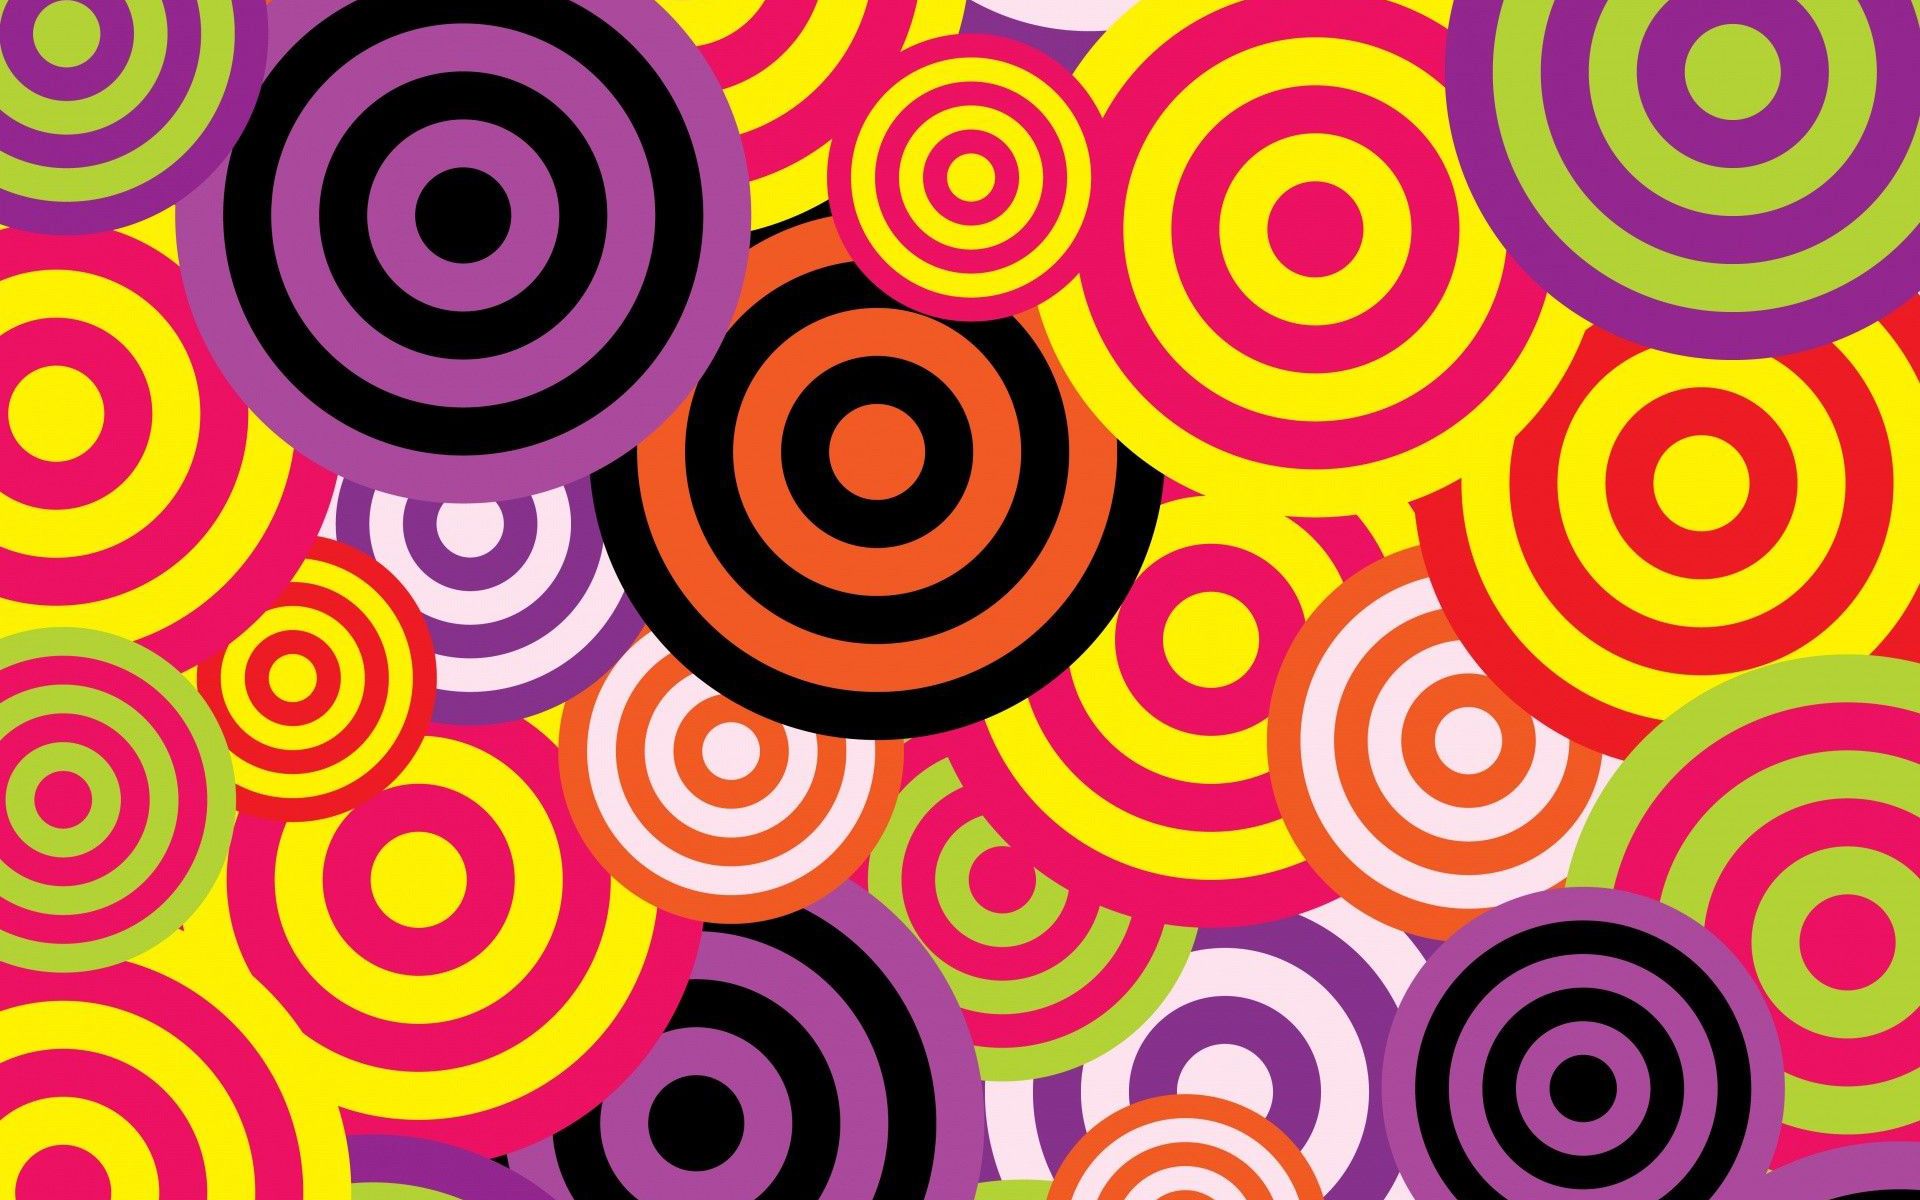 Colorful wallpaper with circles of different sizes and colors - 60s